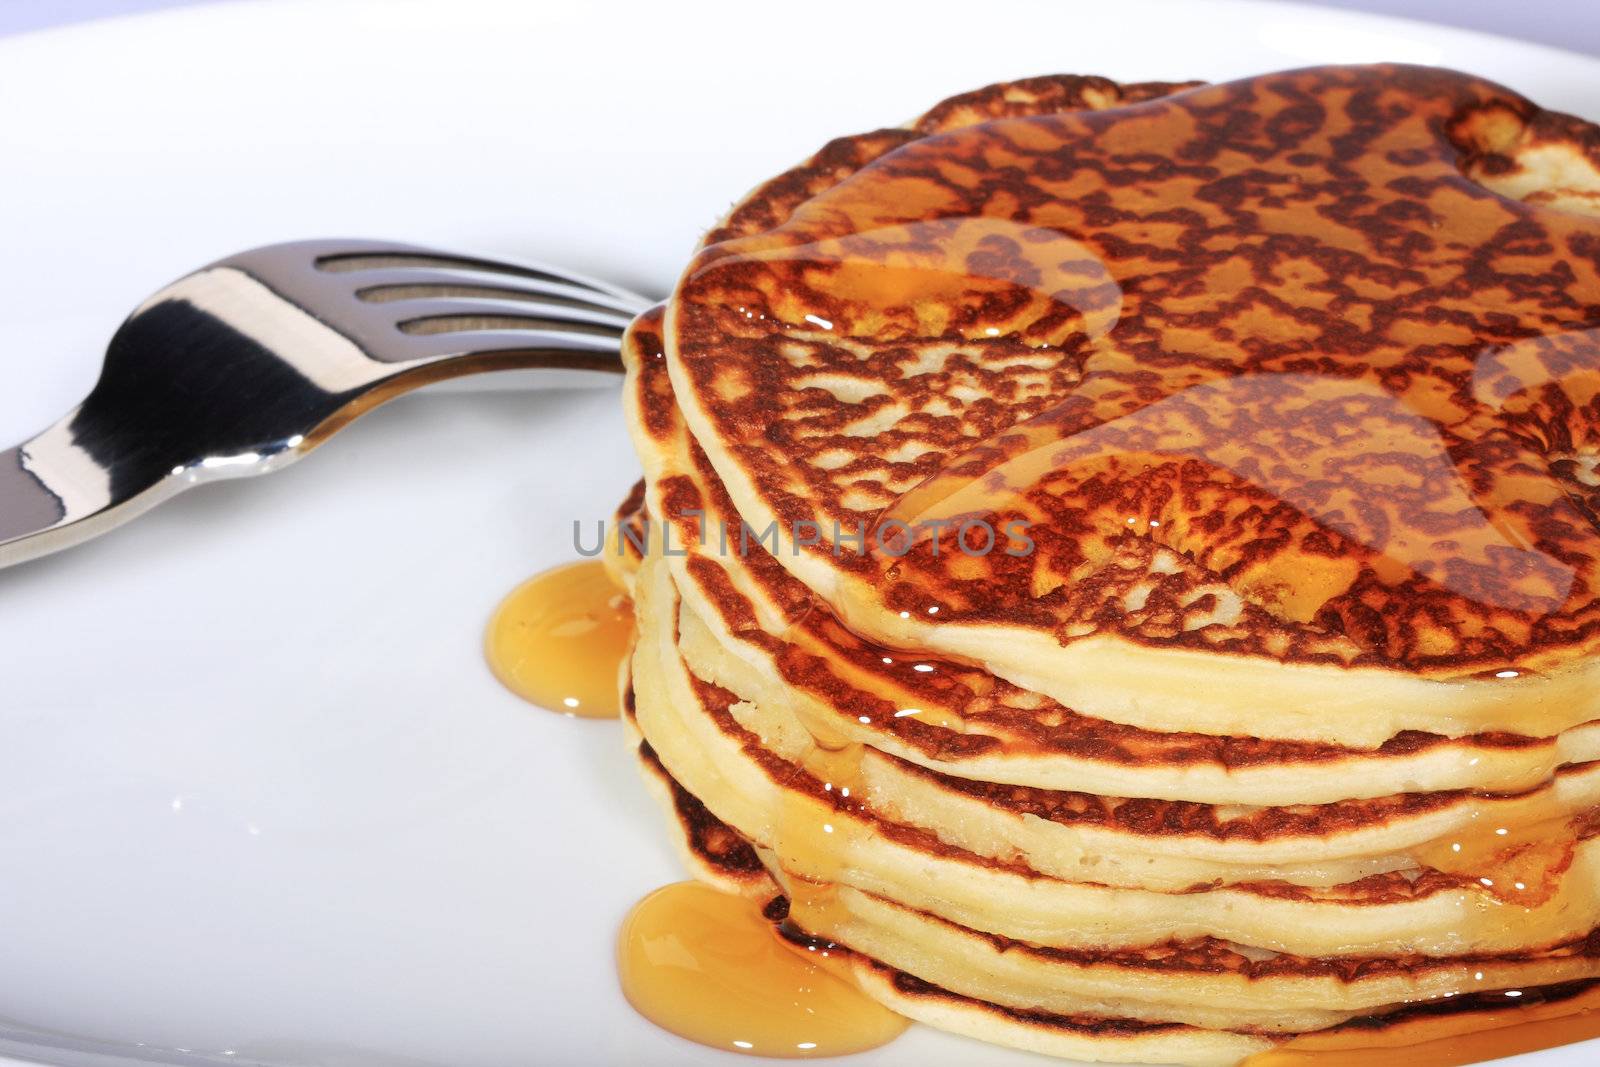 pile of american pancakes with syrup